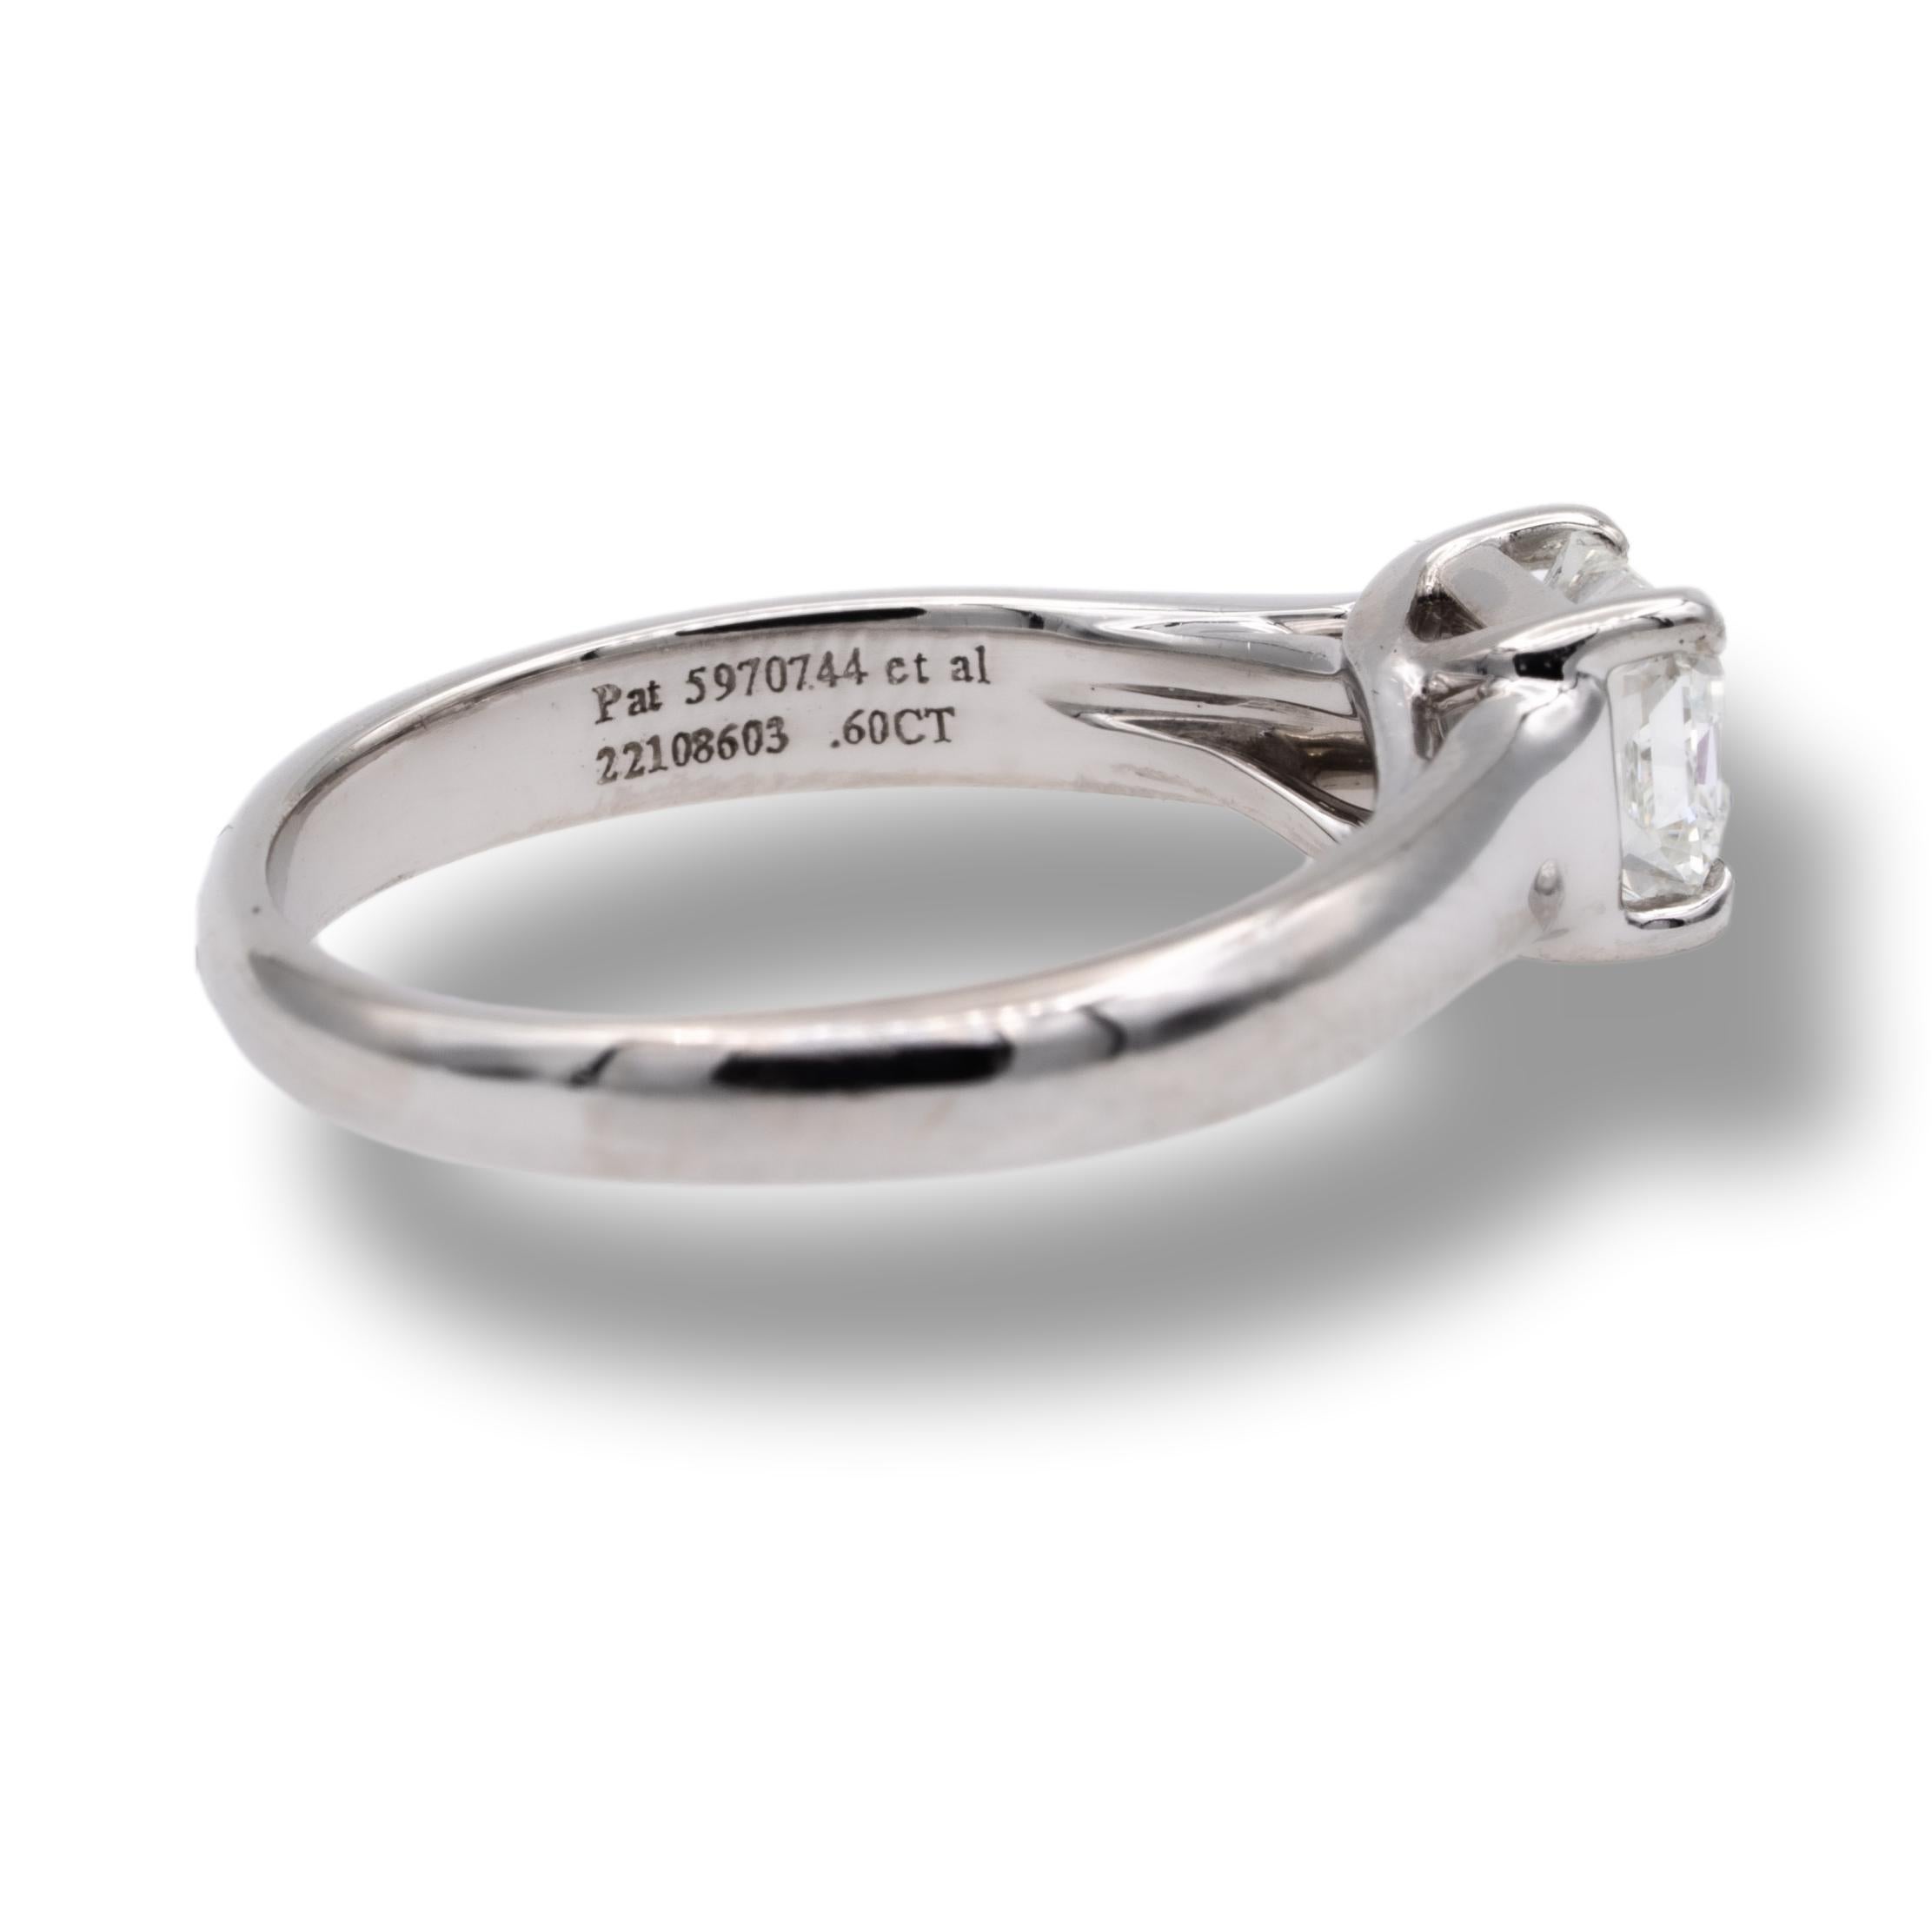 Tiffany & Co Lucida engagement ring with 0.60 carat center H color VVS2 clarity finely crafted in Platinum.  This ring would retail today at $6,200 based on Tiffany True cut pricing

Brand Tiffany & Co.
Hallmark: Tiffany & Co © 1999 Lucida, PT950